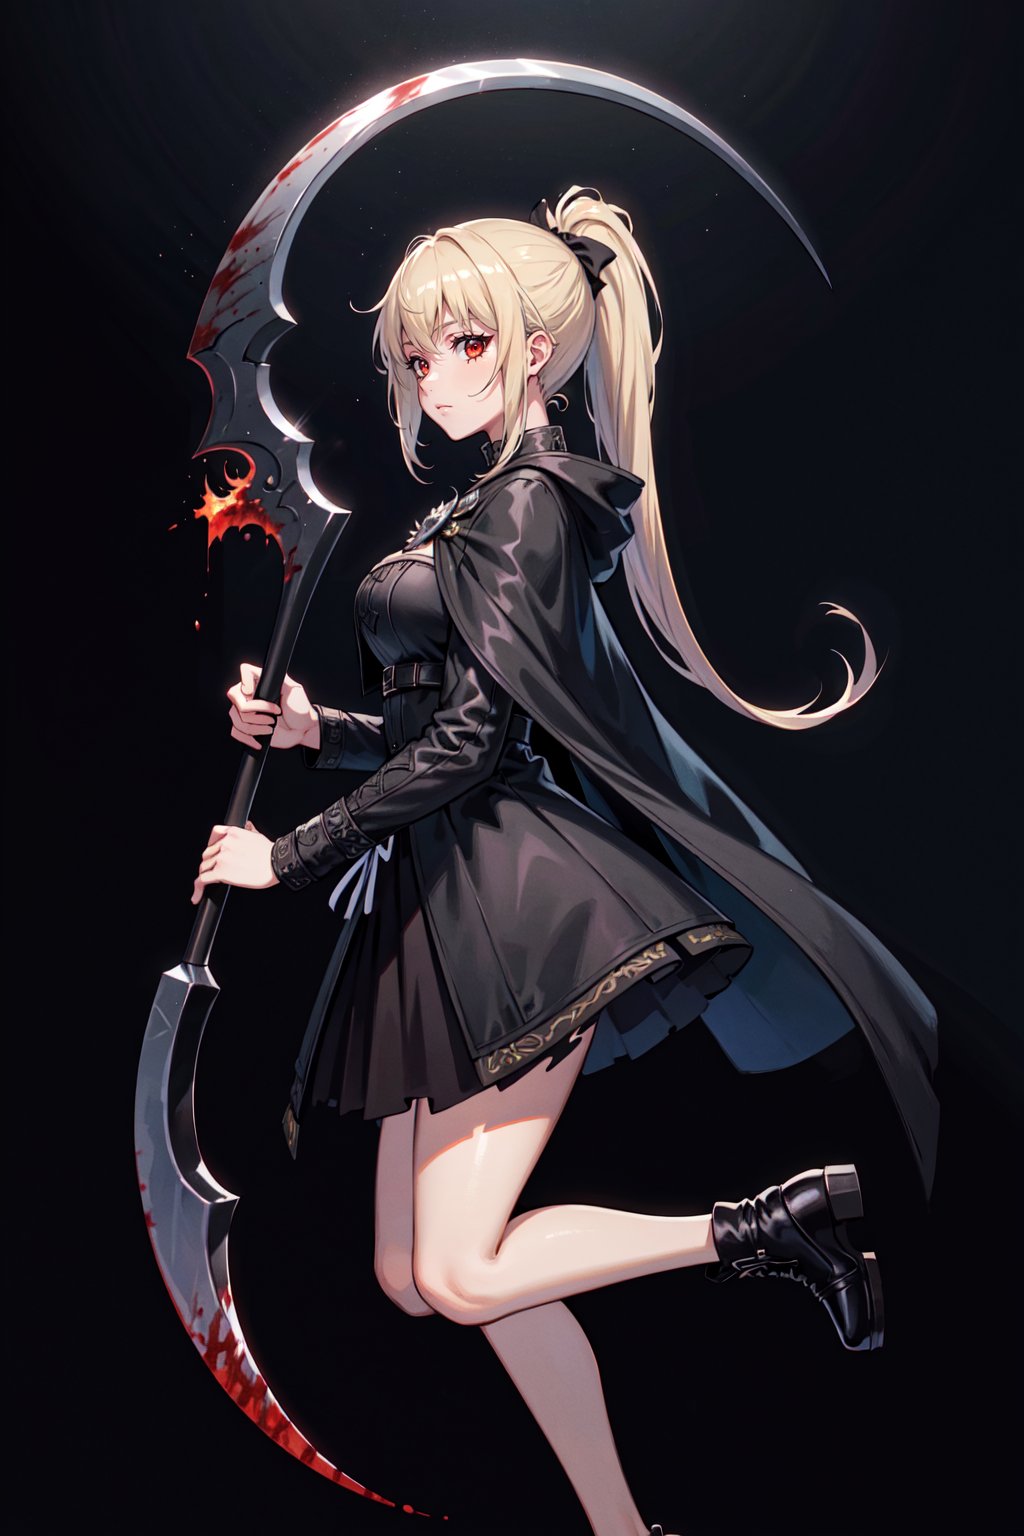 best quality, highres, absurdres, full body, (ultra-detailed:1.1025), ), little girl, patent drawings, dark theme, 1girl, silver hair, high ponytail, red eyes, reflection, night, from side, action, jumping, cold, blonde hair, bare legs, torn clothes, gradient background, ash, flying ash, dust, stationery, (, solo, ), cohesive background, (, character sheet, ), thin, full body, long dress, flying, scythe, big scythe, black fire, black flame, white flame, cold, ice, gothic, scythe, big scythe, monster, huge weapon, weapon, (, (best quality), ), (, (masterpiece), ), (, (ultra-detailed), ), (, illustration, ), (, detailed light, ), (, an extremely delicate and beautiful, ), (, (a beautiful girl:1.4), ), (, (cowboy shot), ), (, (standding), incredibly_absurdres, wallpaper, highres, artbook, death, ((Death Scythe)), Scythe, cloak, black background, bone, Monster, saint-like, Frightening, Perfect weapon, Death, Death, Death darksouls, blood stain, bloodborne, dark, (masterpiece), (best quality), (super delicate), (best illustration), (an extremely delicate and beautiful), (intricate detail), (depth of field), (extremely detailed), extremely detailed, 32K UHD, absurdres, super-resolution, Canon EOS MARK IV